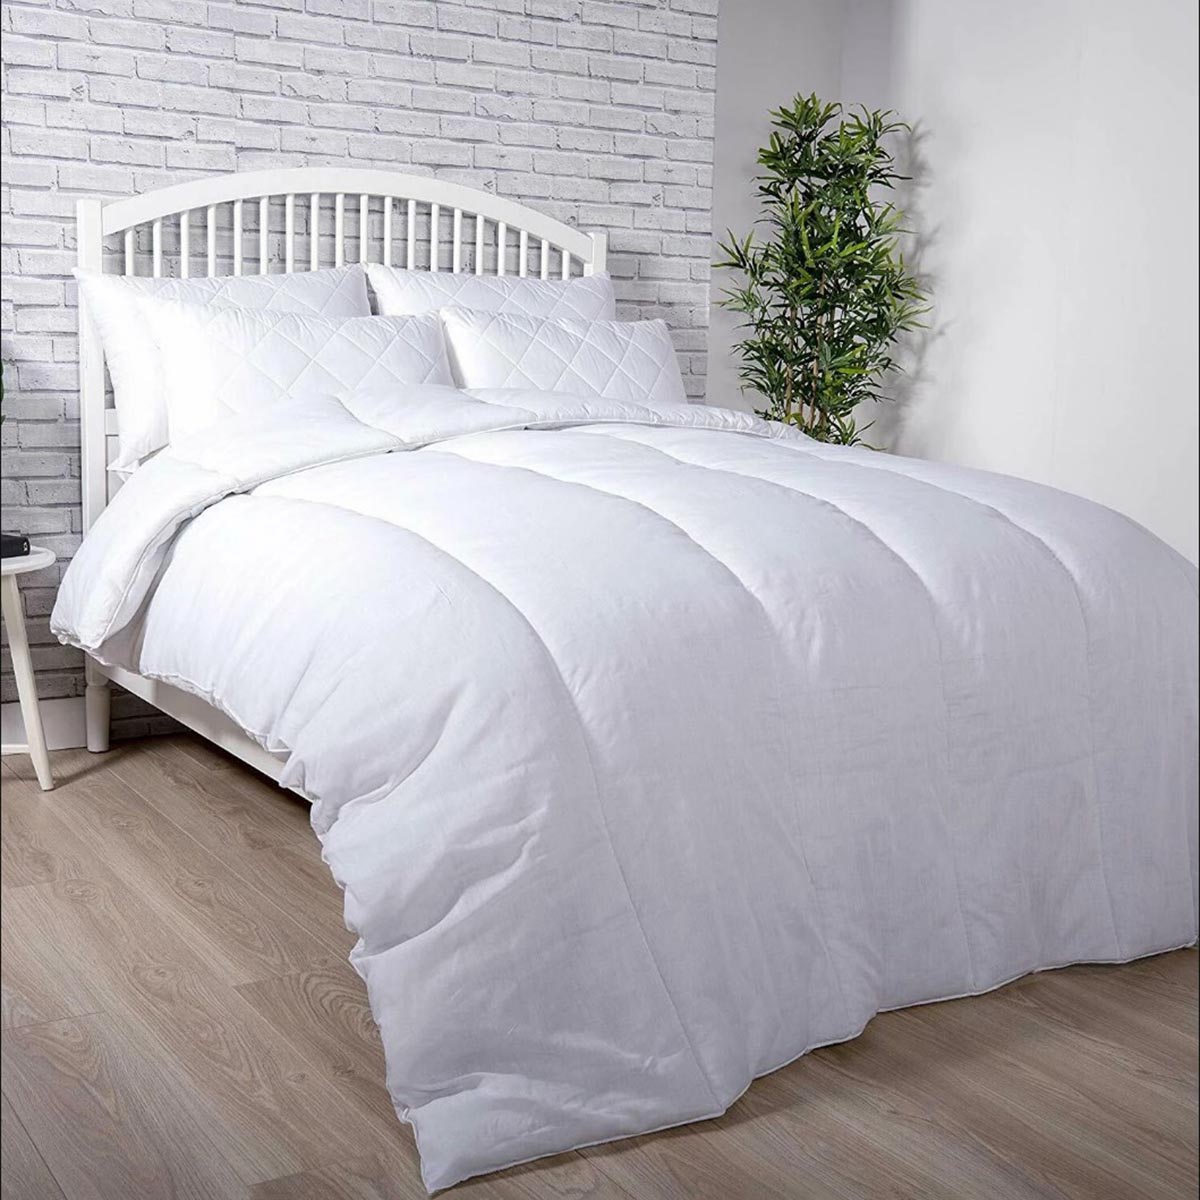 How Big Is A Double Duvet